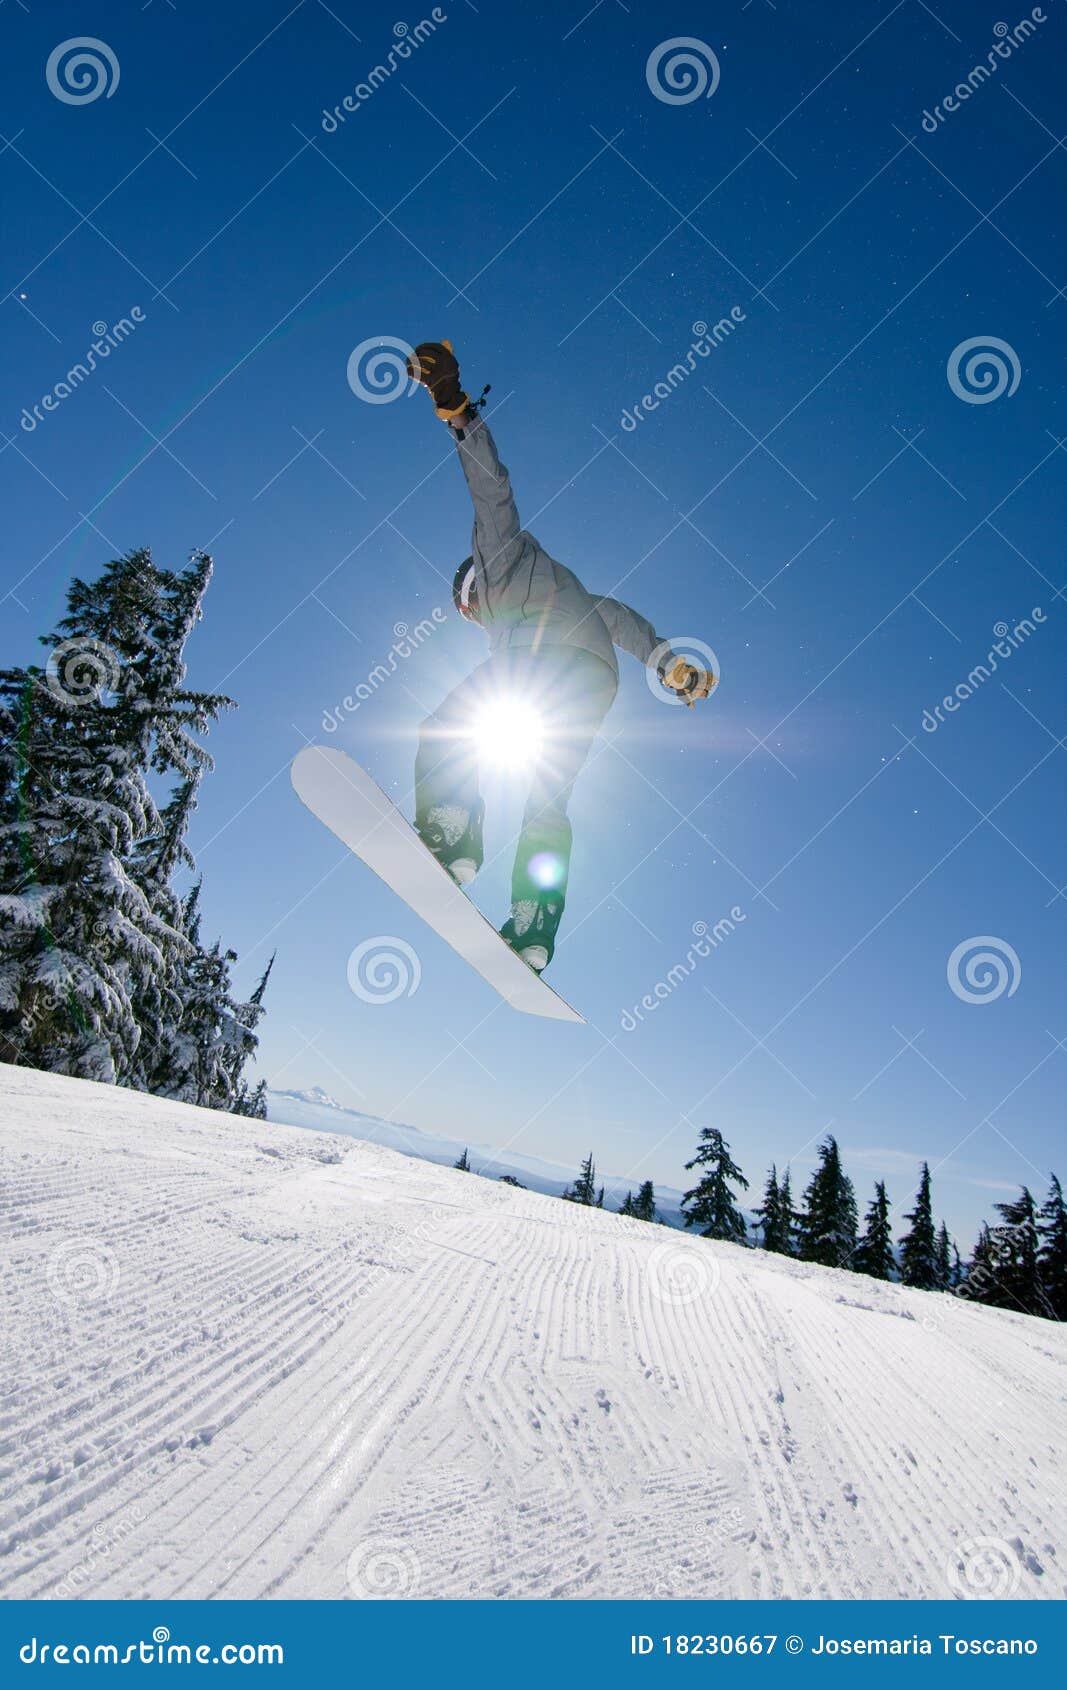 male snowboarder catches big air.